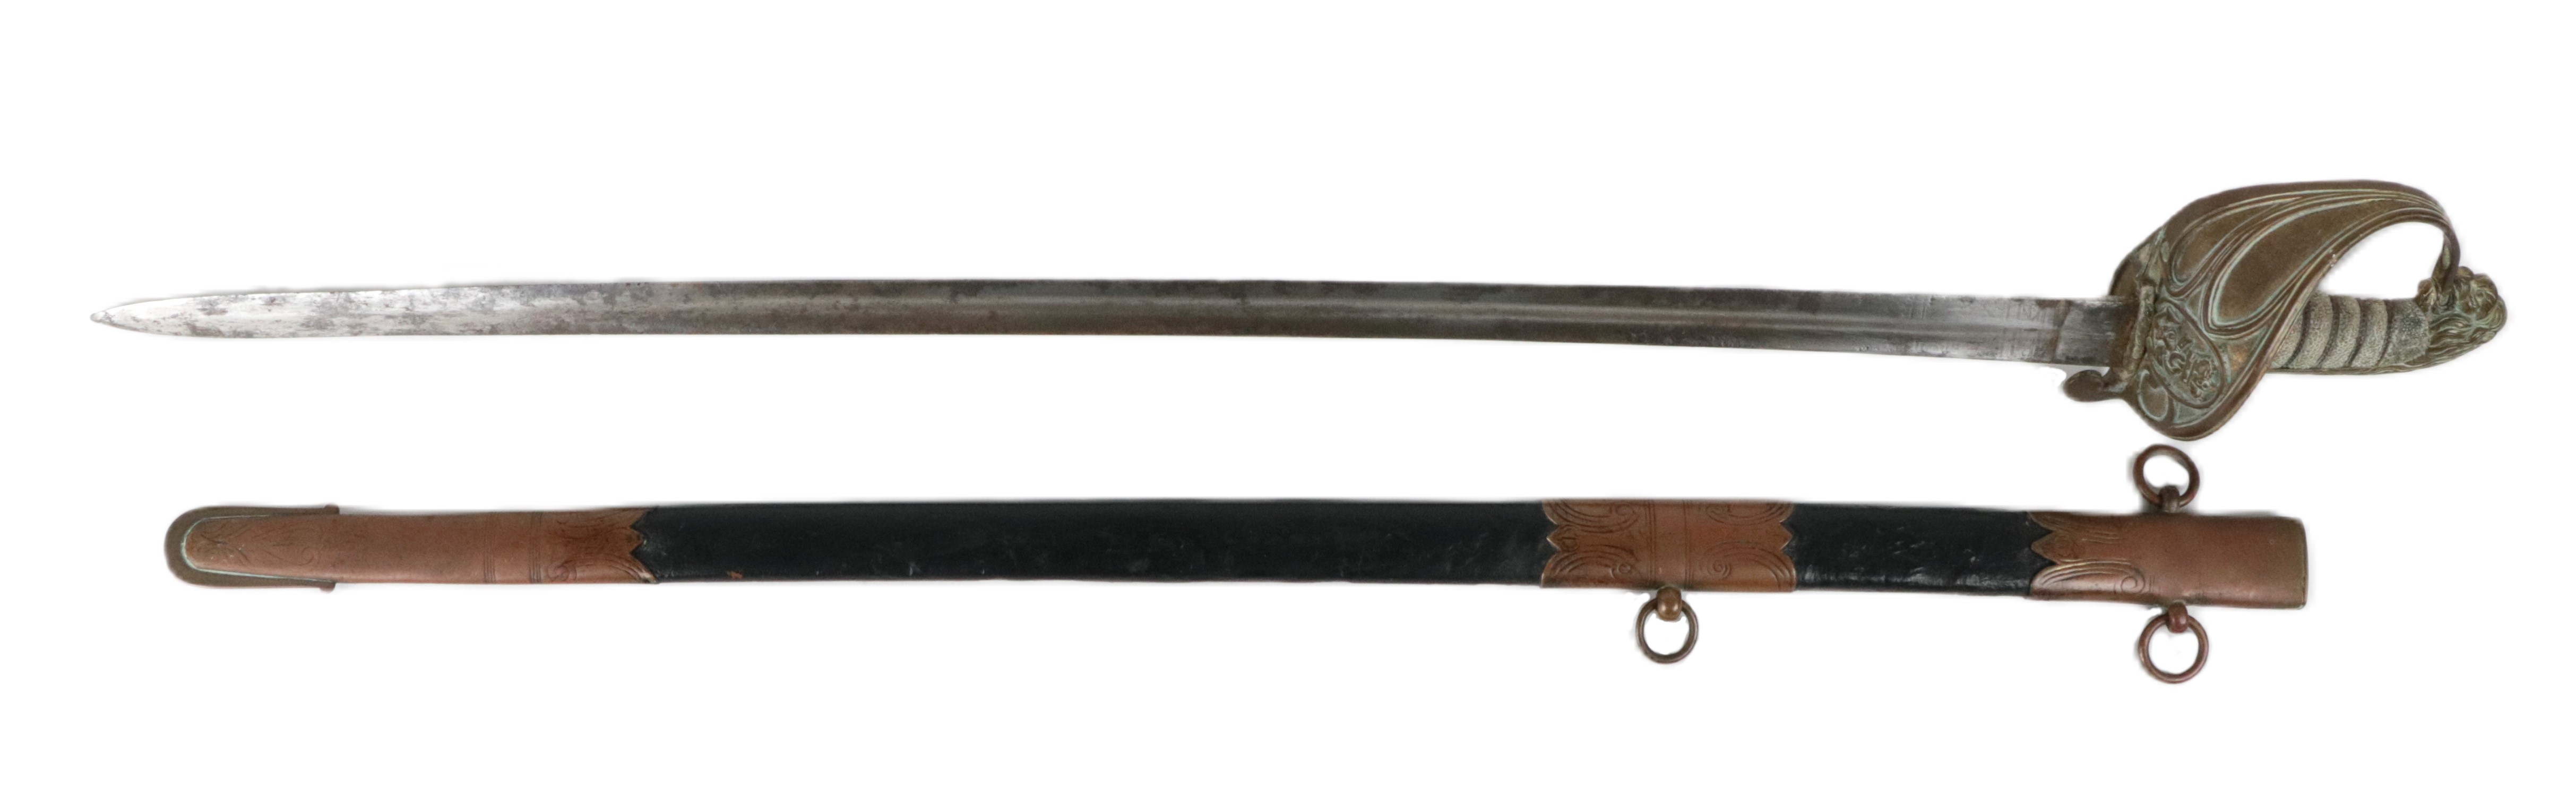 Militaria: A late 19th Century Naval Sword, probably by James Cracknell, Portsea (makers marks worn) - Bild 2 aus 4